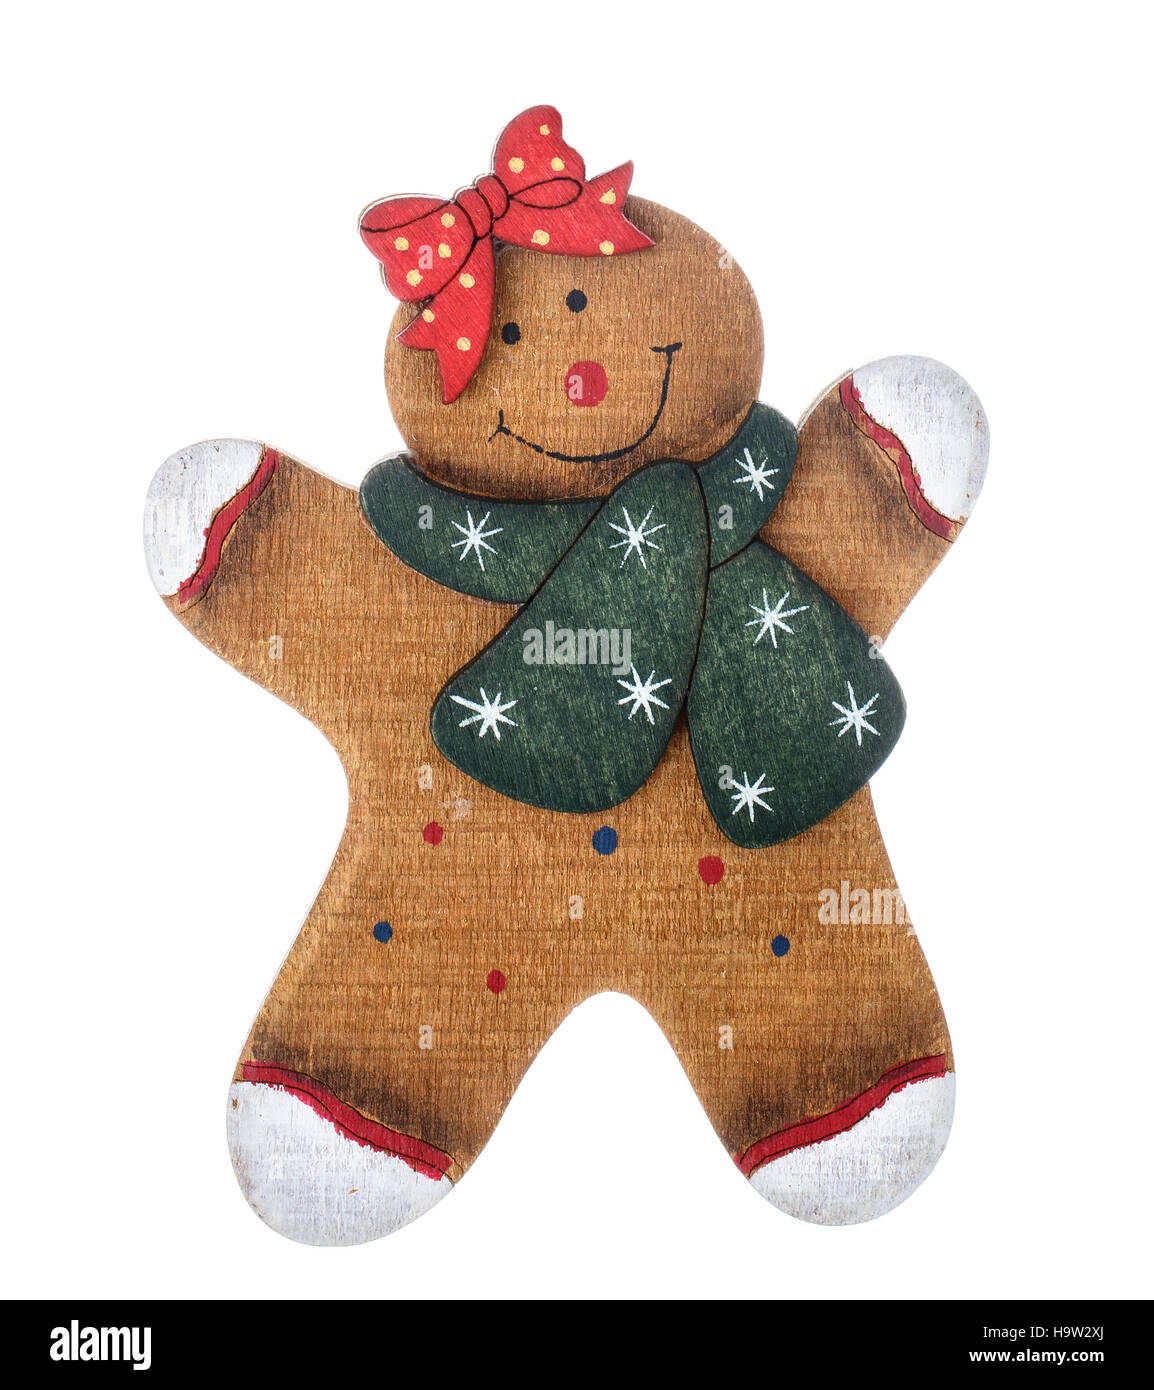 wooden Gingerbread man on white Stock Photo